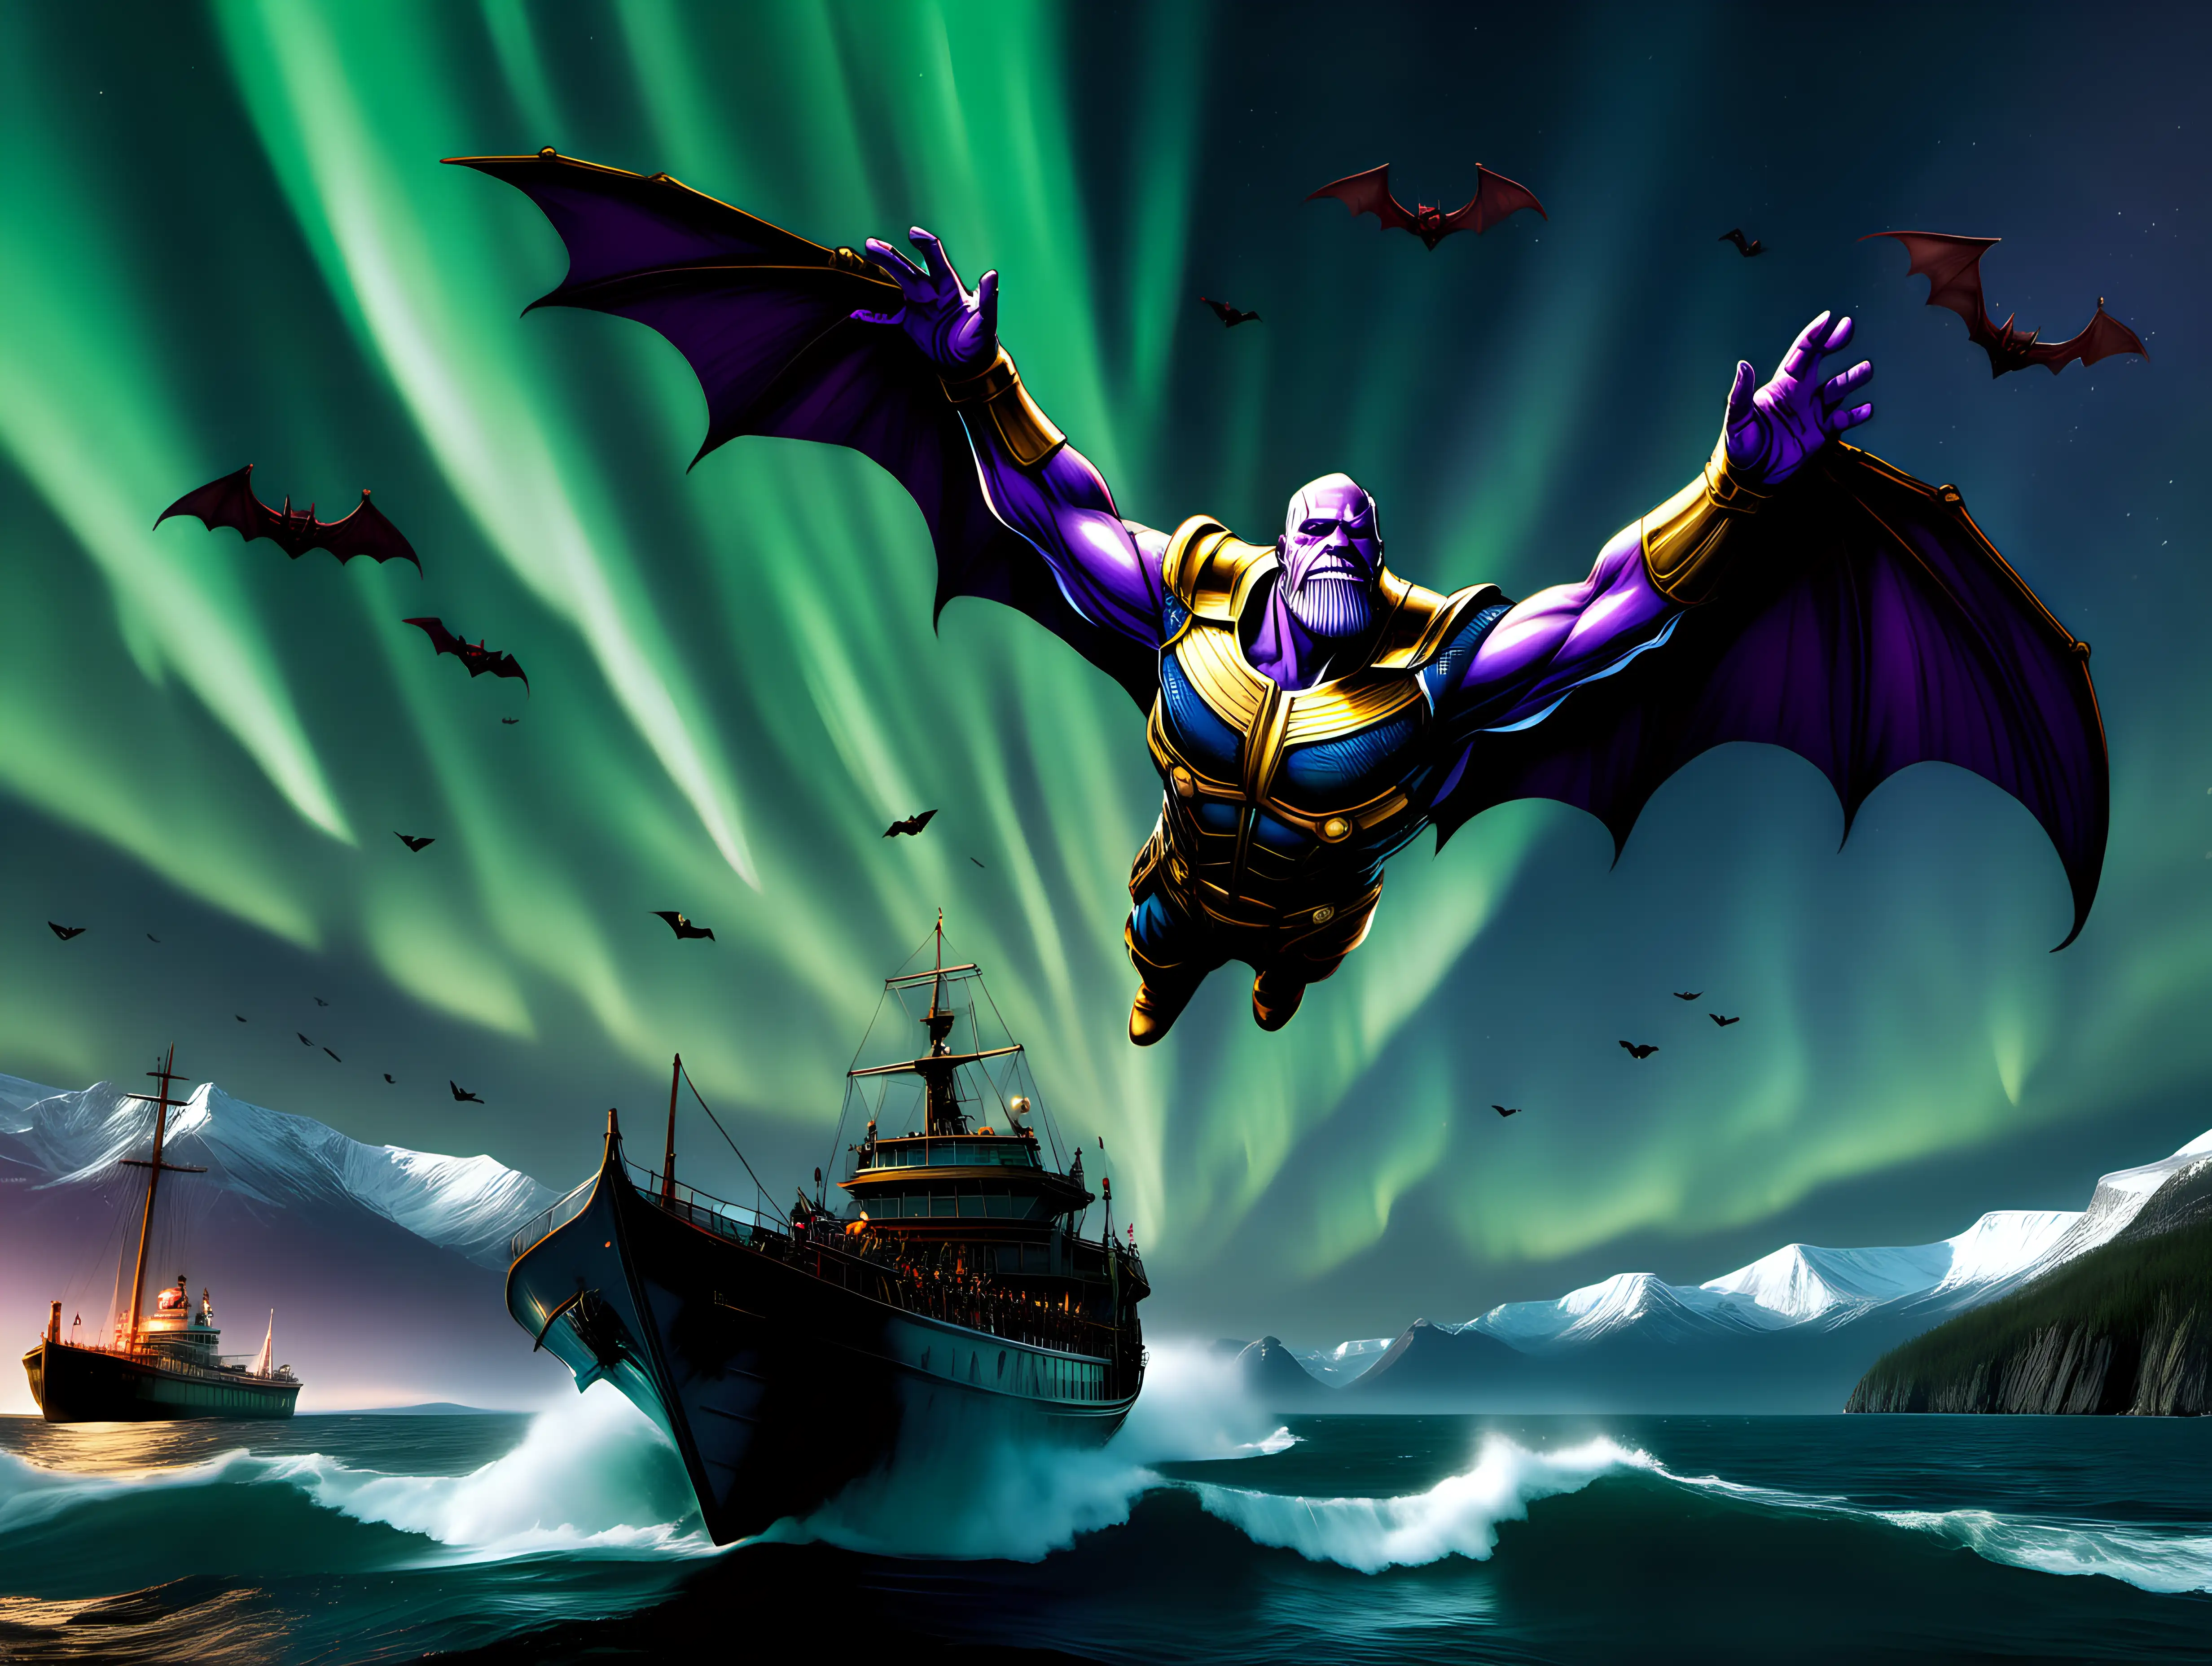  Thanos raising out of the sky and vampire bats hovering over ships sailing near the aurora borealis photorealistic